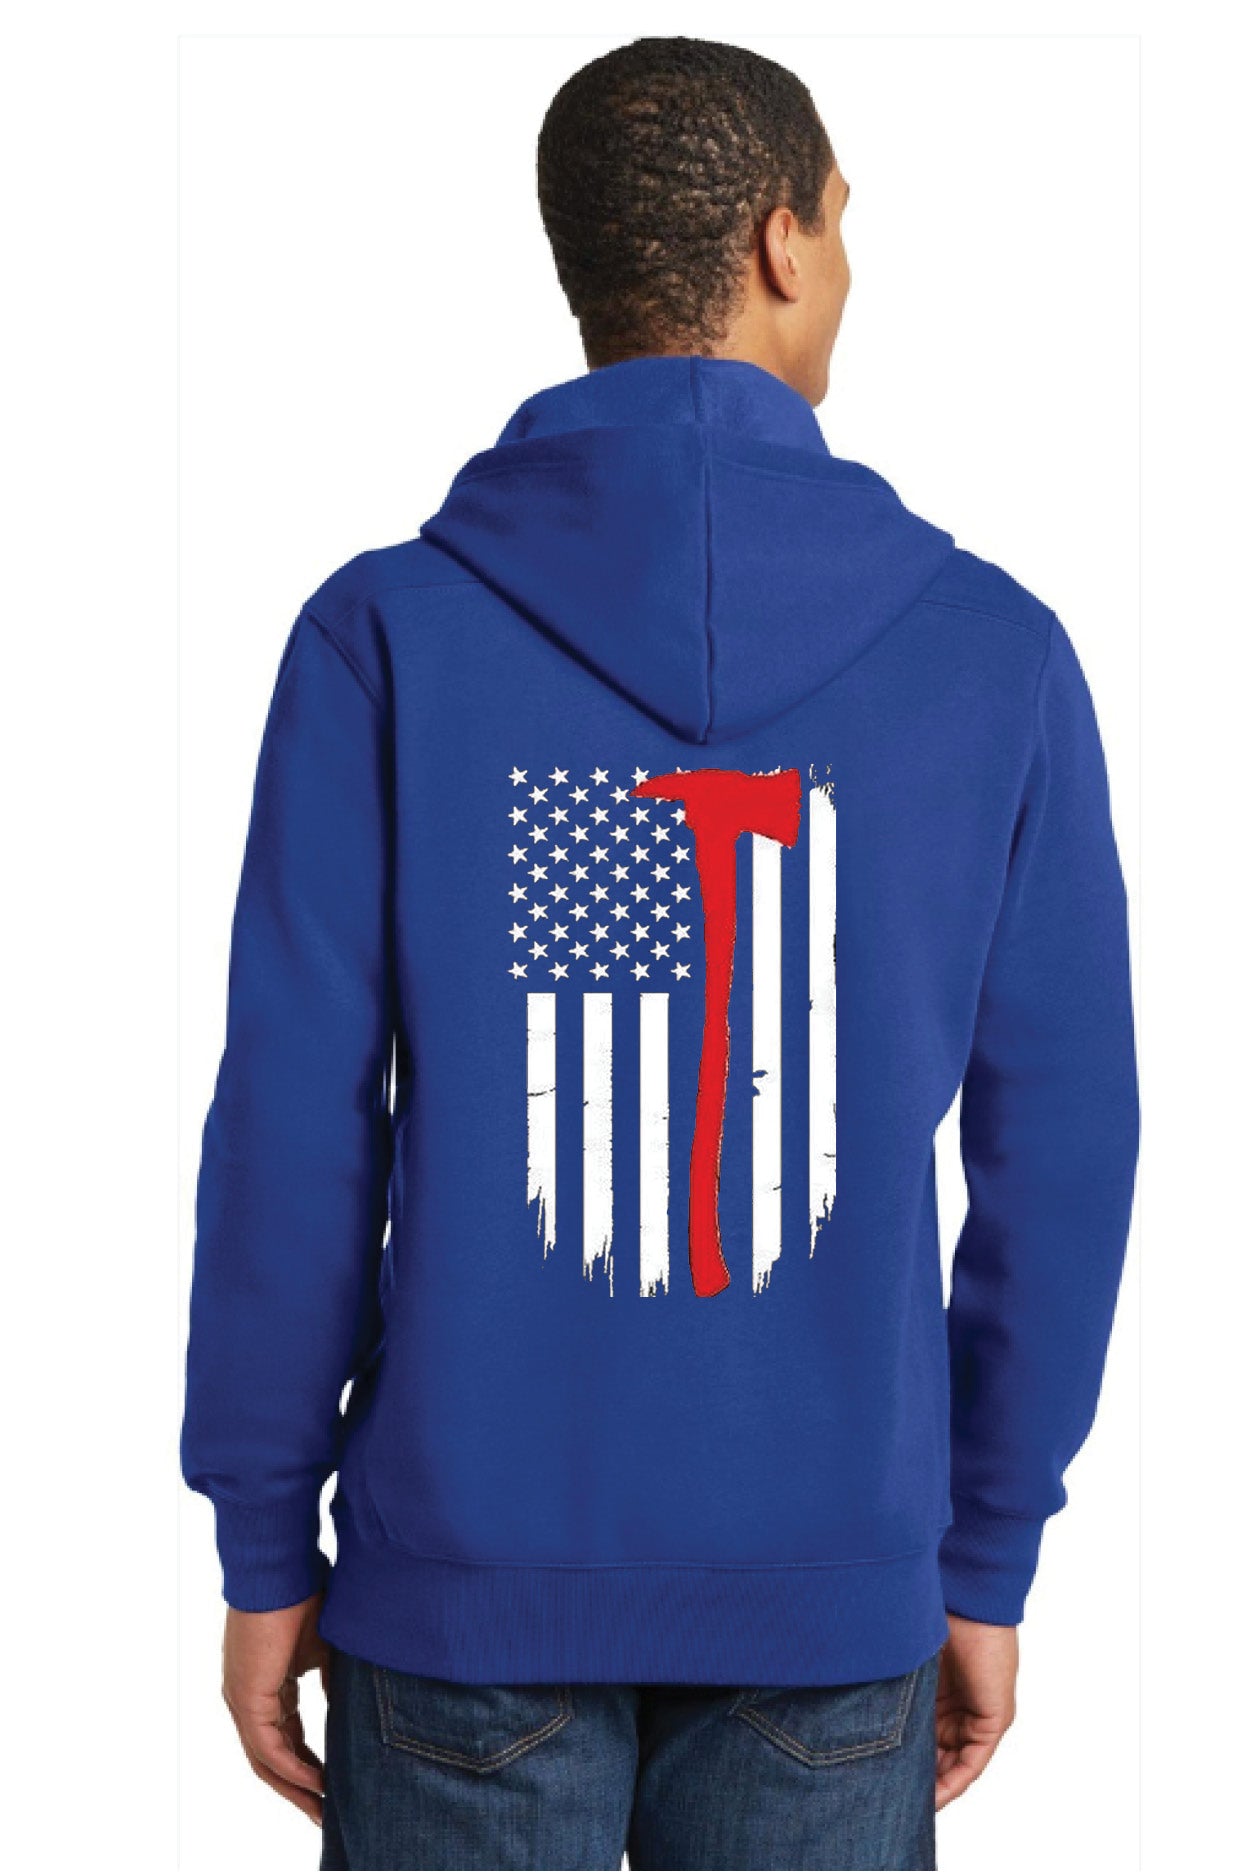 Lace Up Pullover Hooded Sweatshirt with Full Back Halligan Flag